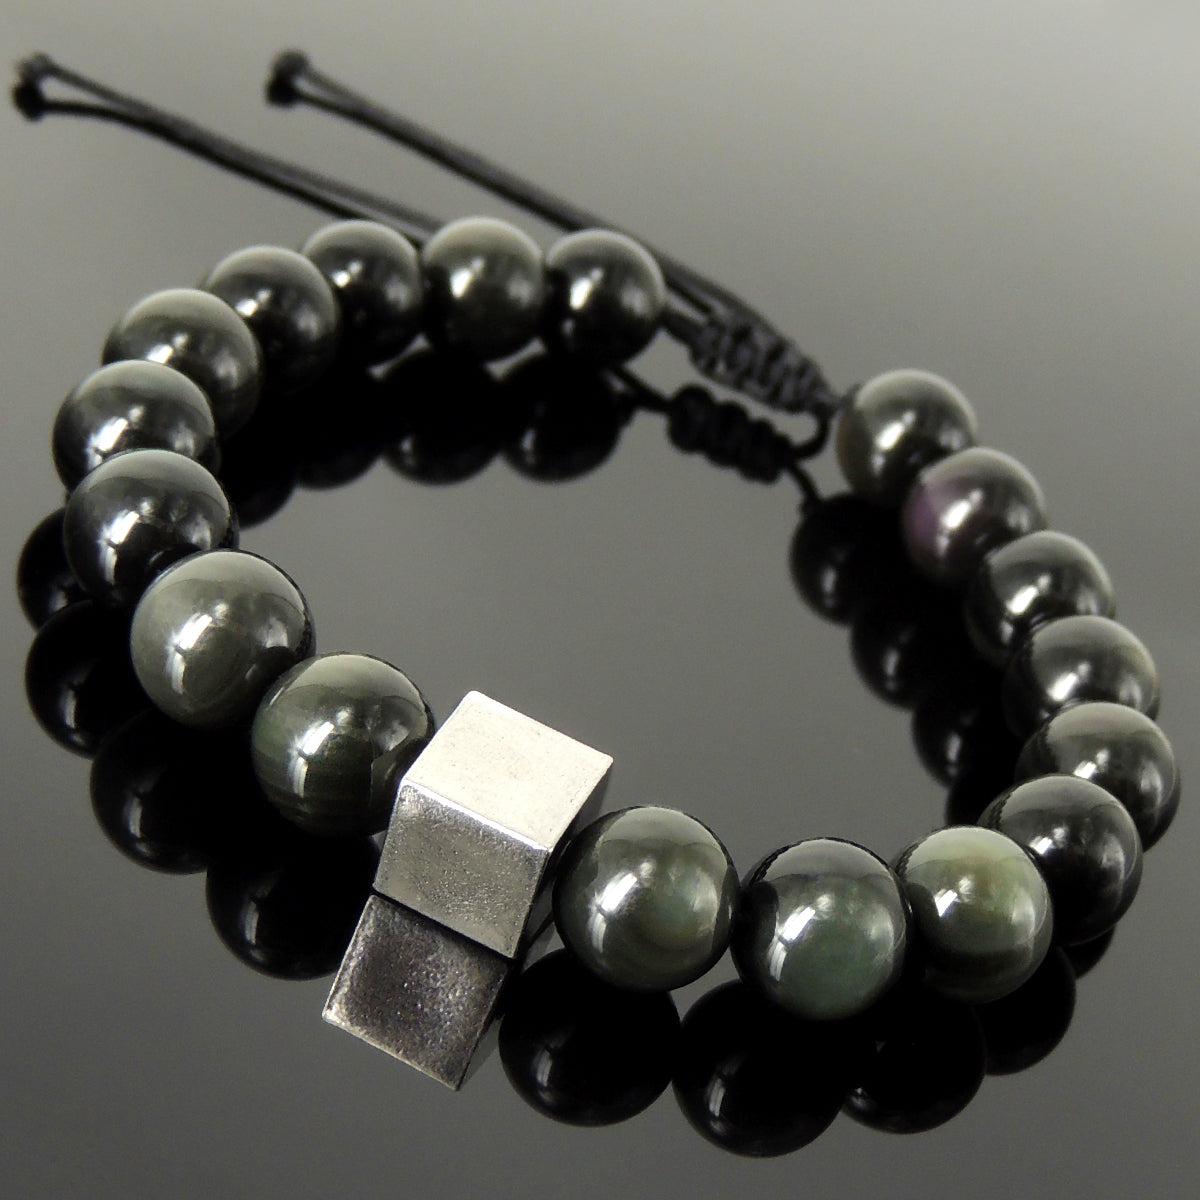 Energy Cube Gemstone Jewelry Handmade Braided Bracelet - Mens Womens Protection, Casual Wear with 10mm Rainbow Black Obsidian, Adjustable Drawstring, S925 Sterling Silver Bead BR1719